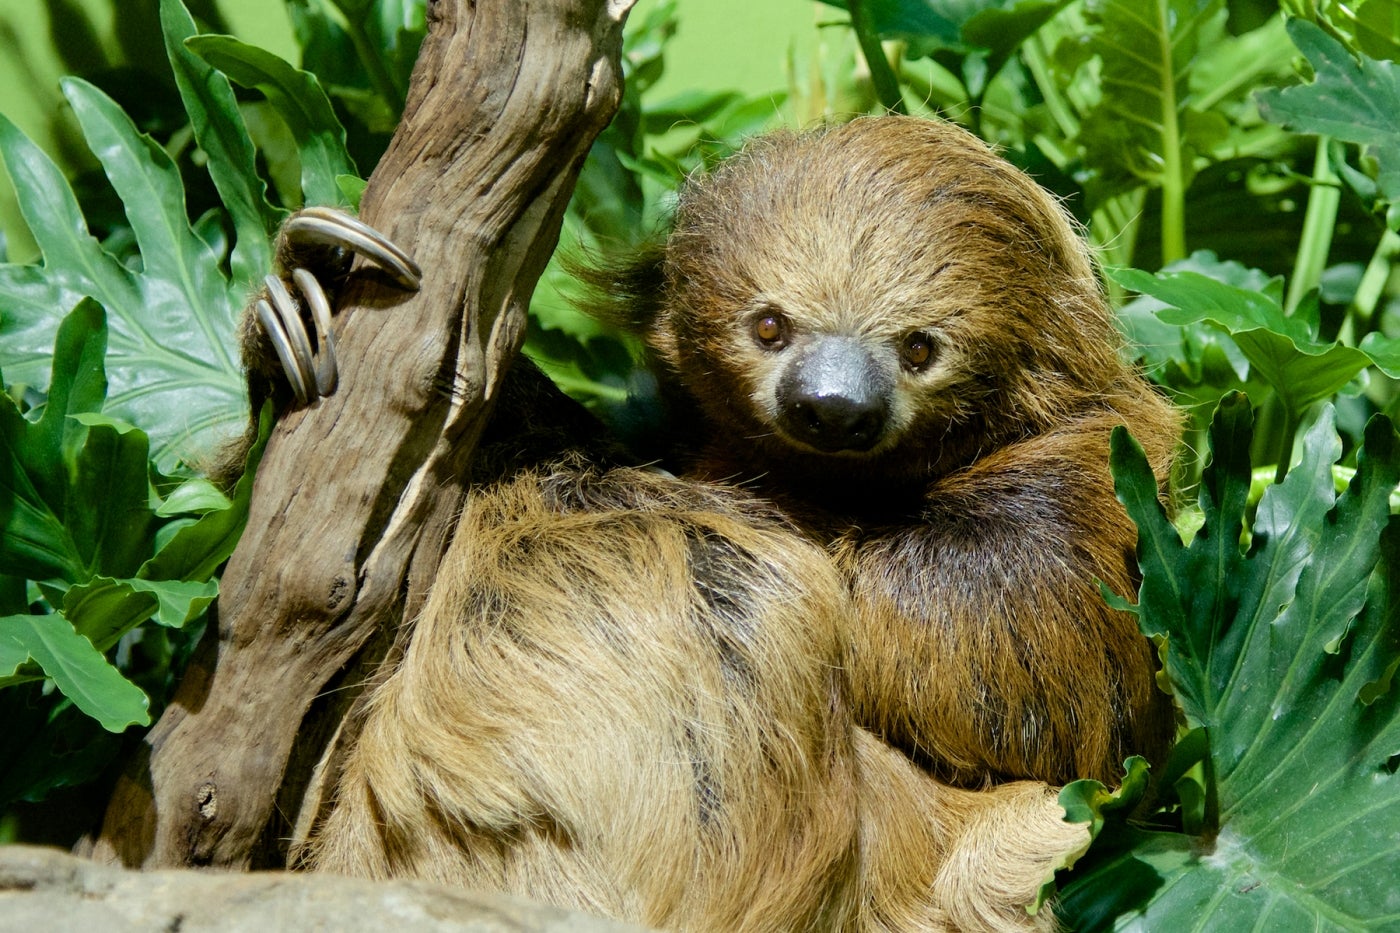 A southern two-toed sloth with long, coarse brown fur, a small snout, small eyes, long limbs and curved claws perches in a tree and holds onto a branch